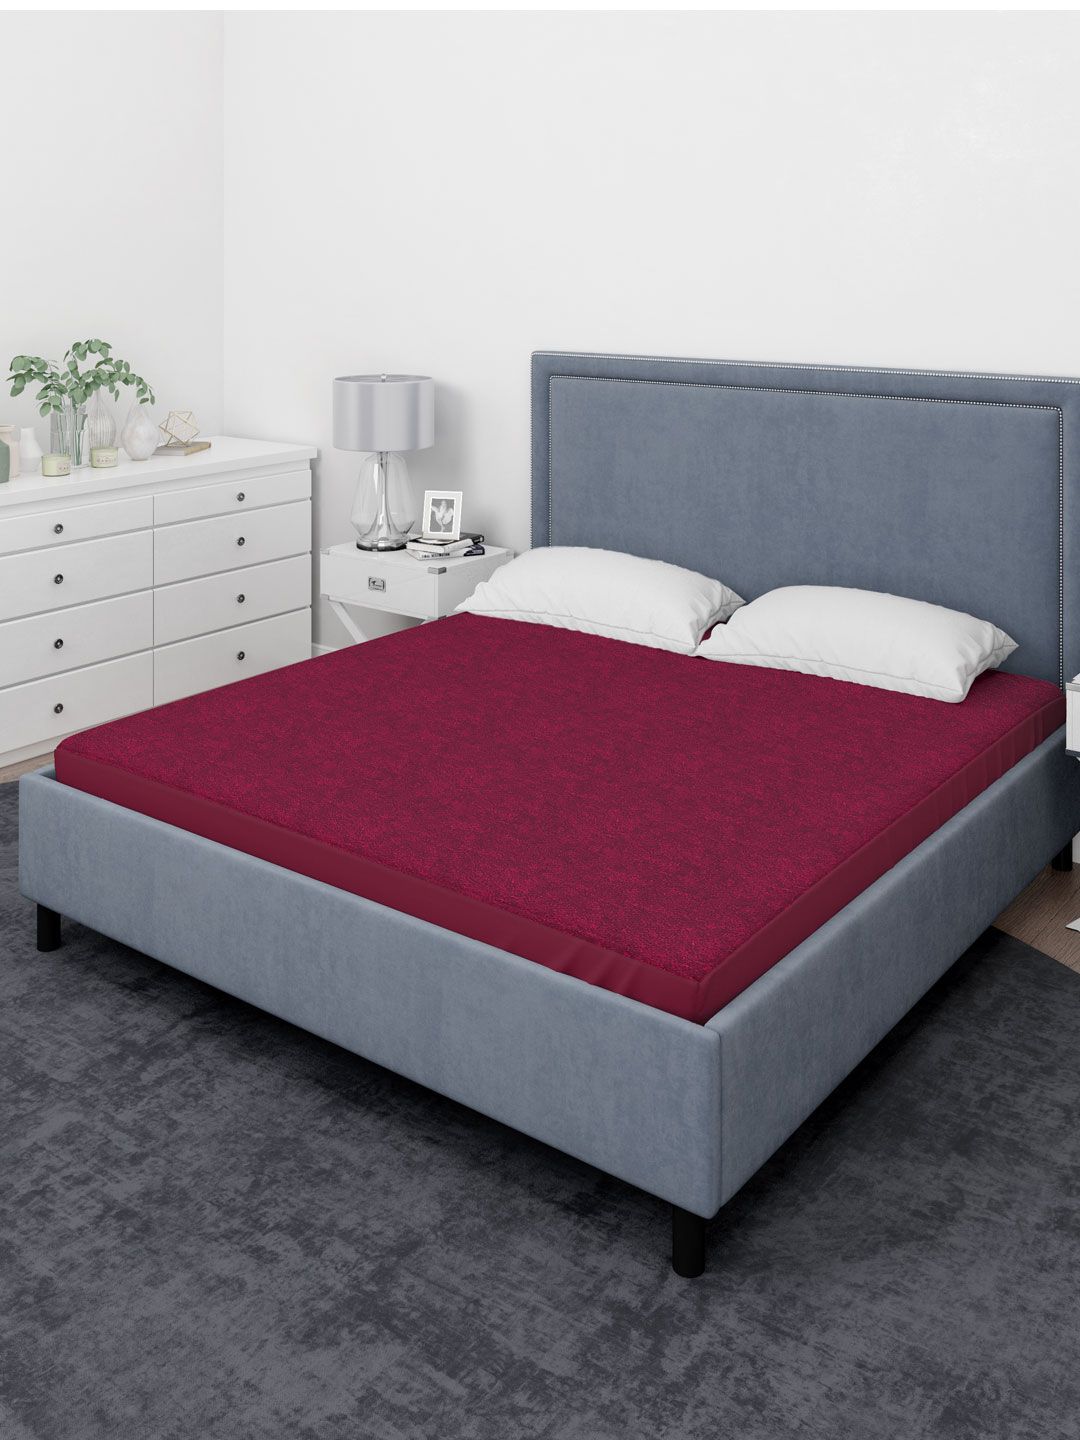 Aura Maroon Solid Single Size Terry Cotton Waterproof Mattress Protector Price in India